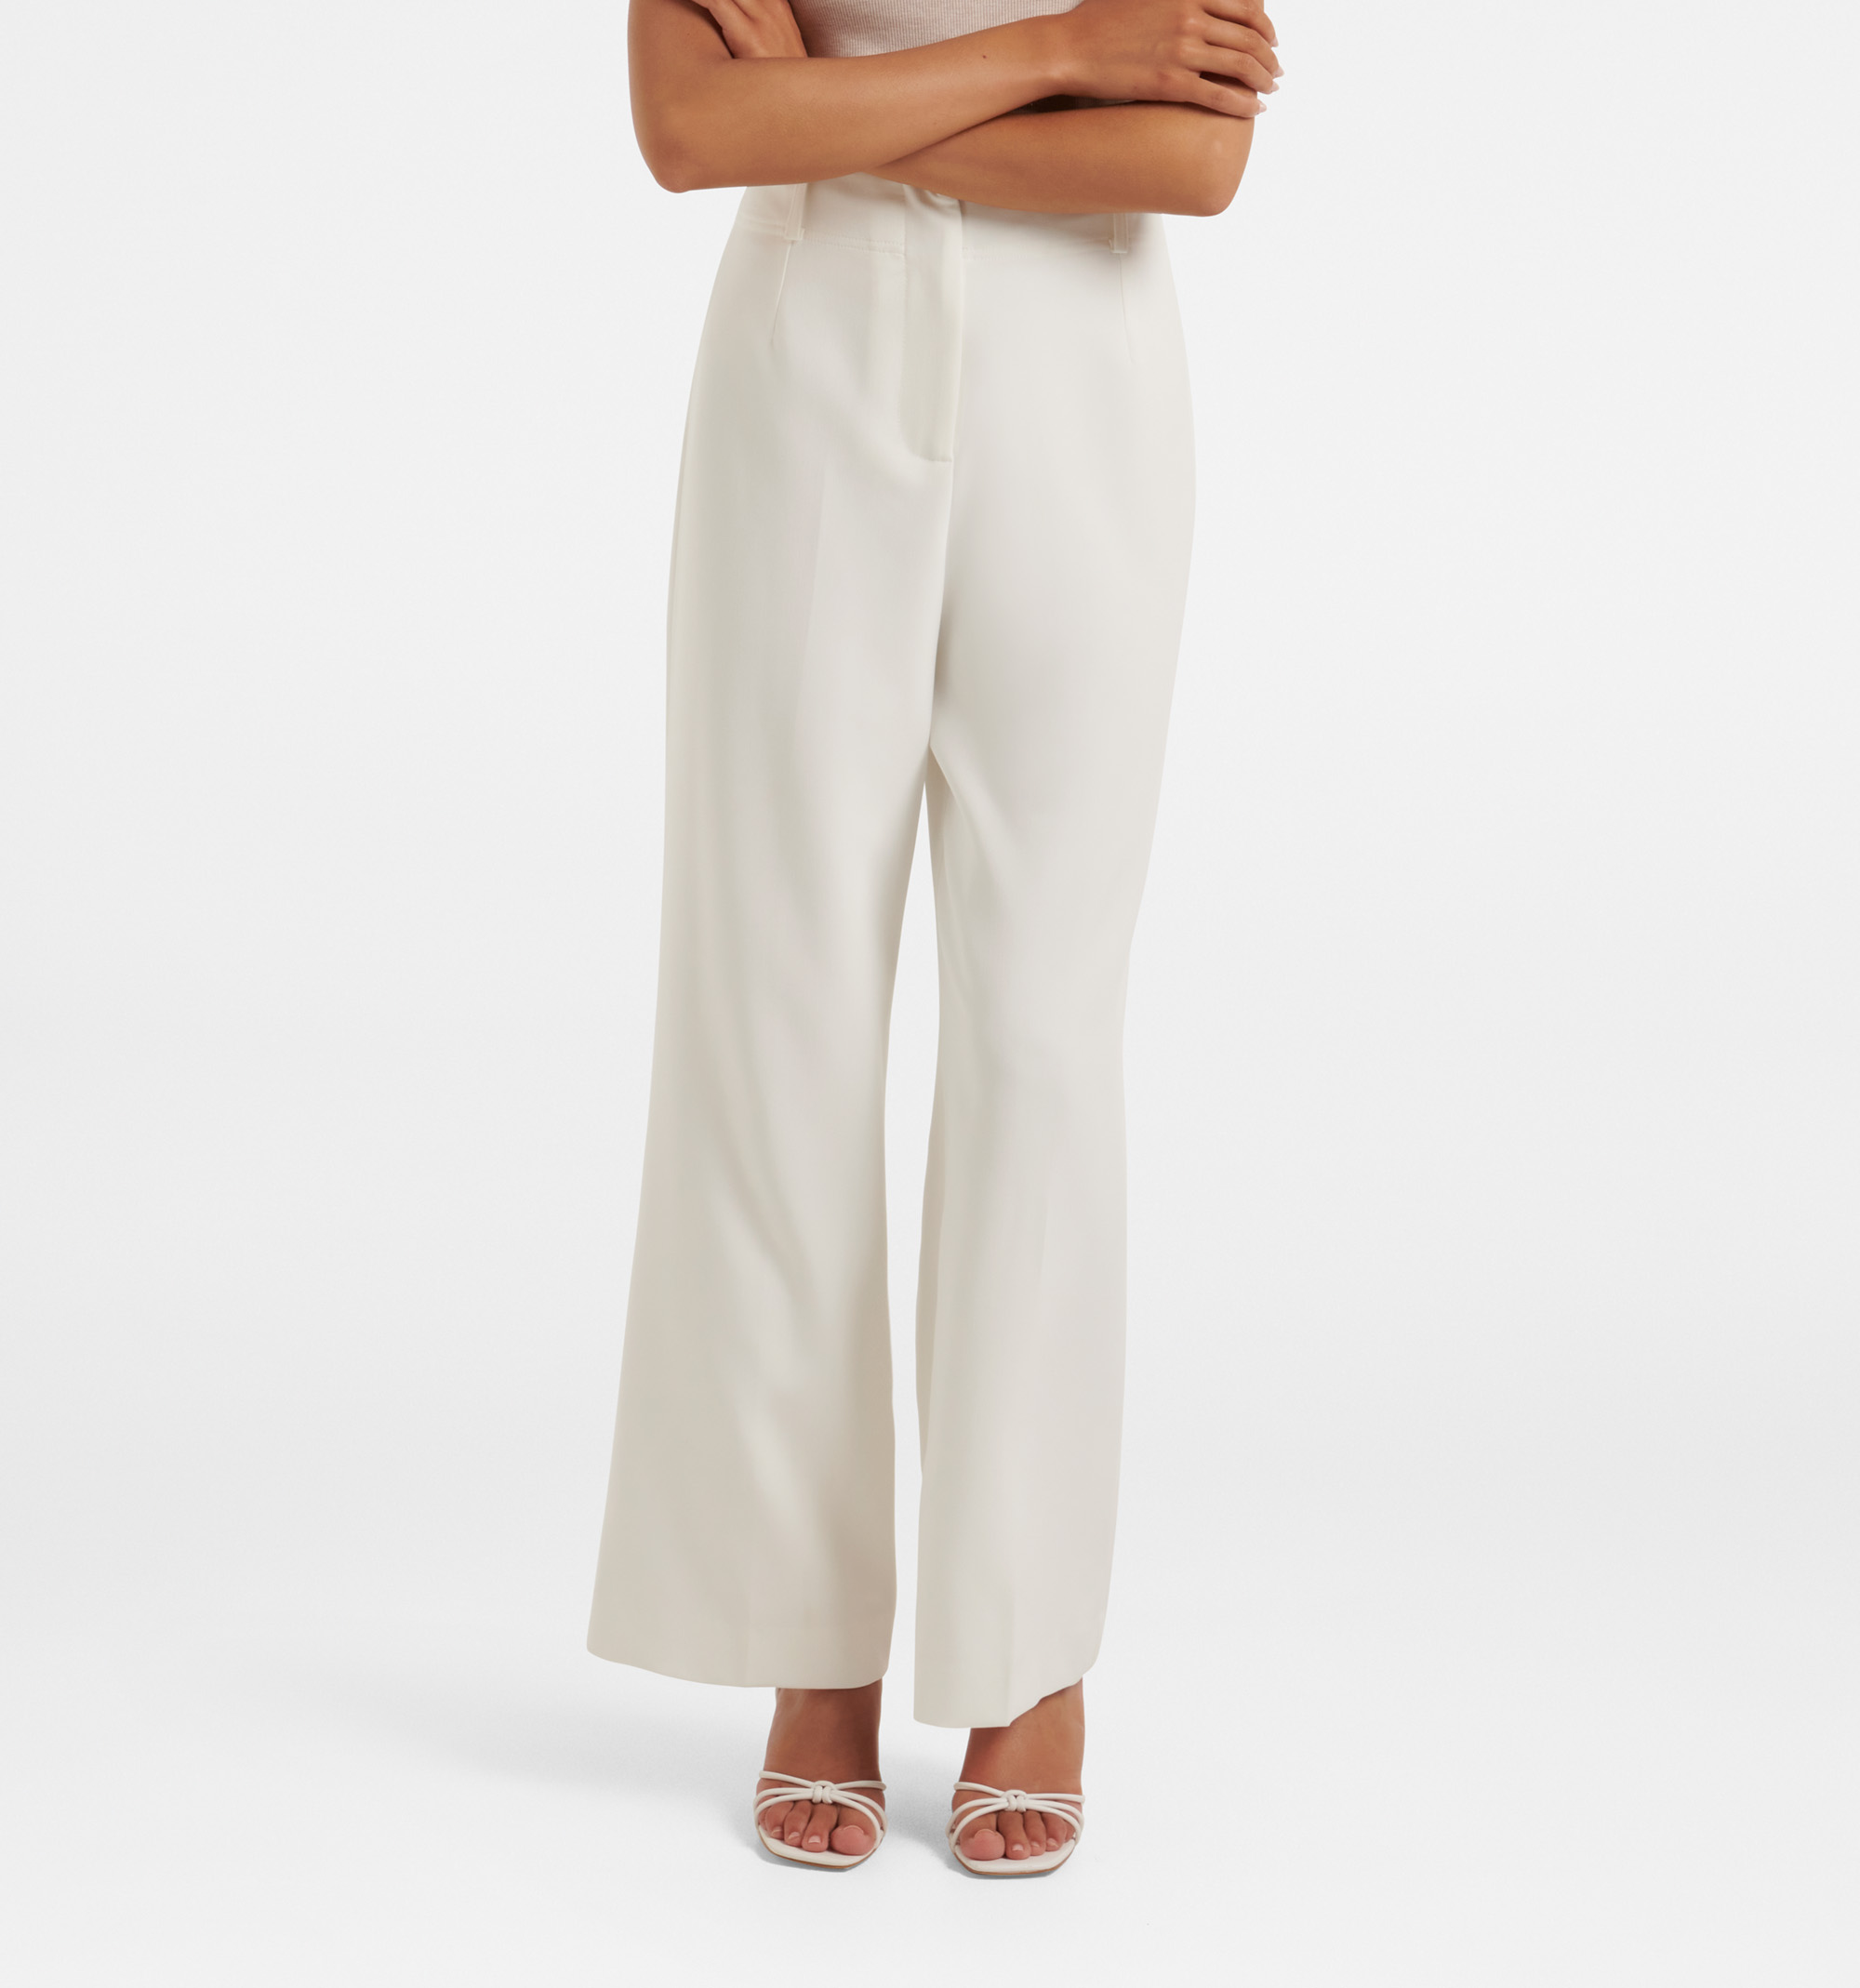 PullBear high waisted tailored straight leg pants with front seam in black   ASOS